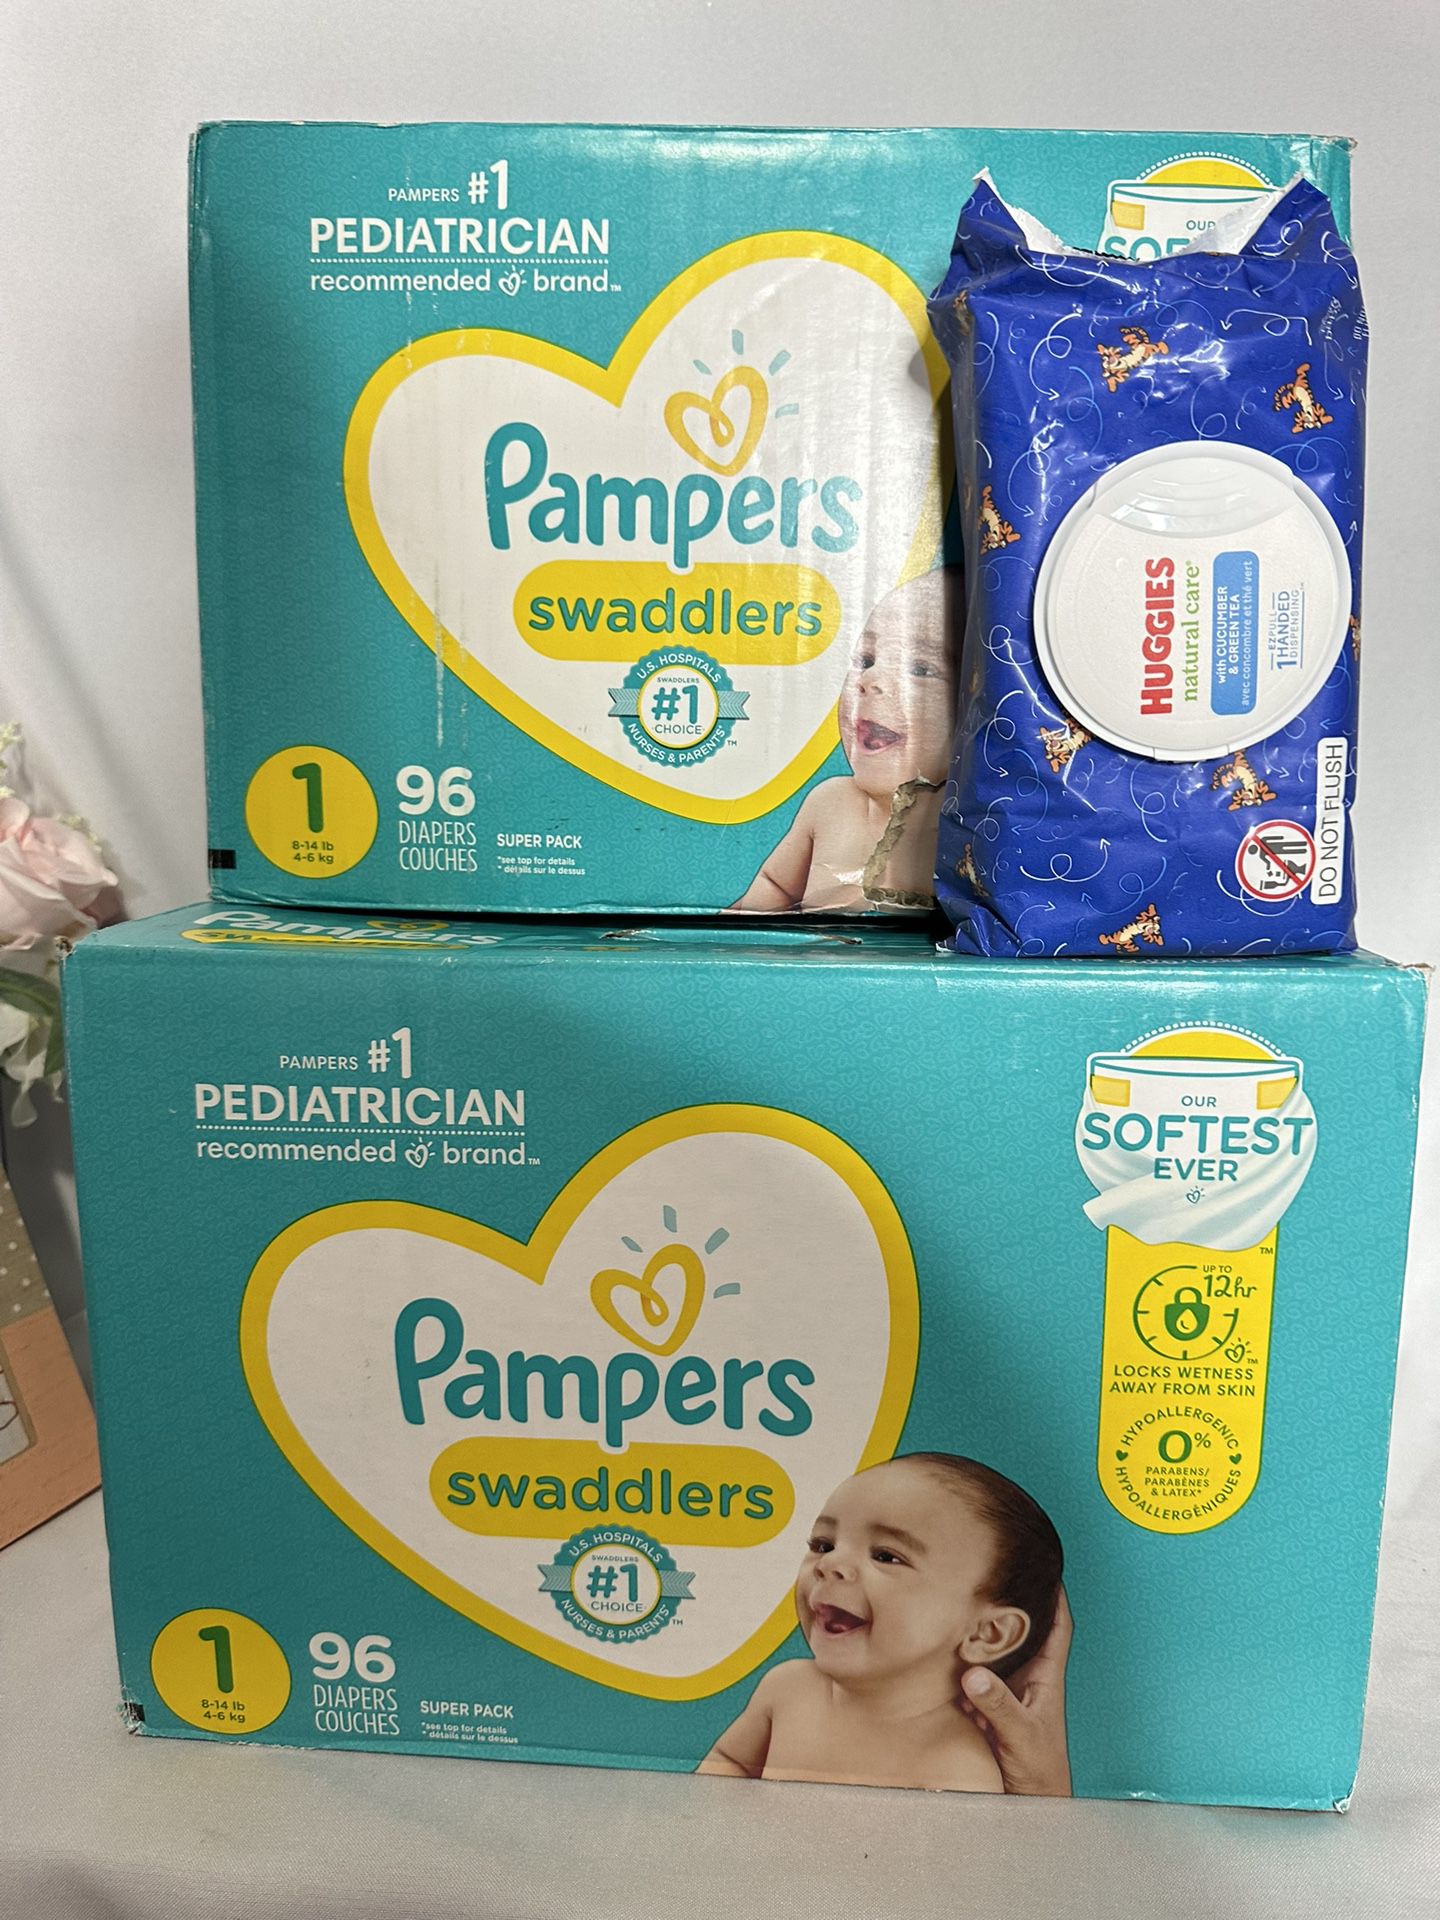 Pampers size 1 + baby wipes $45 for all 